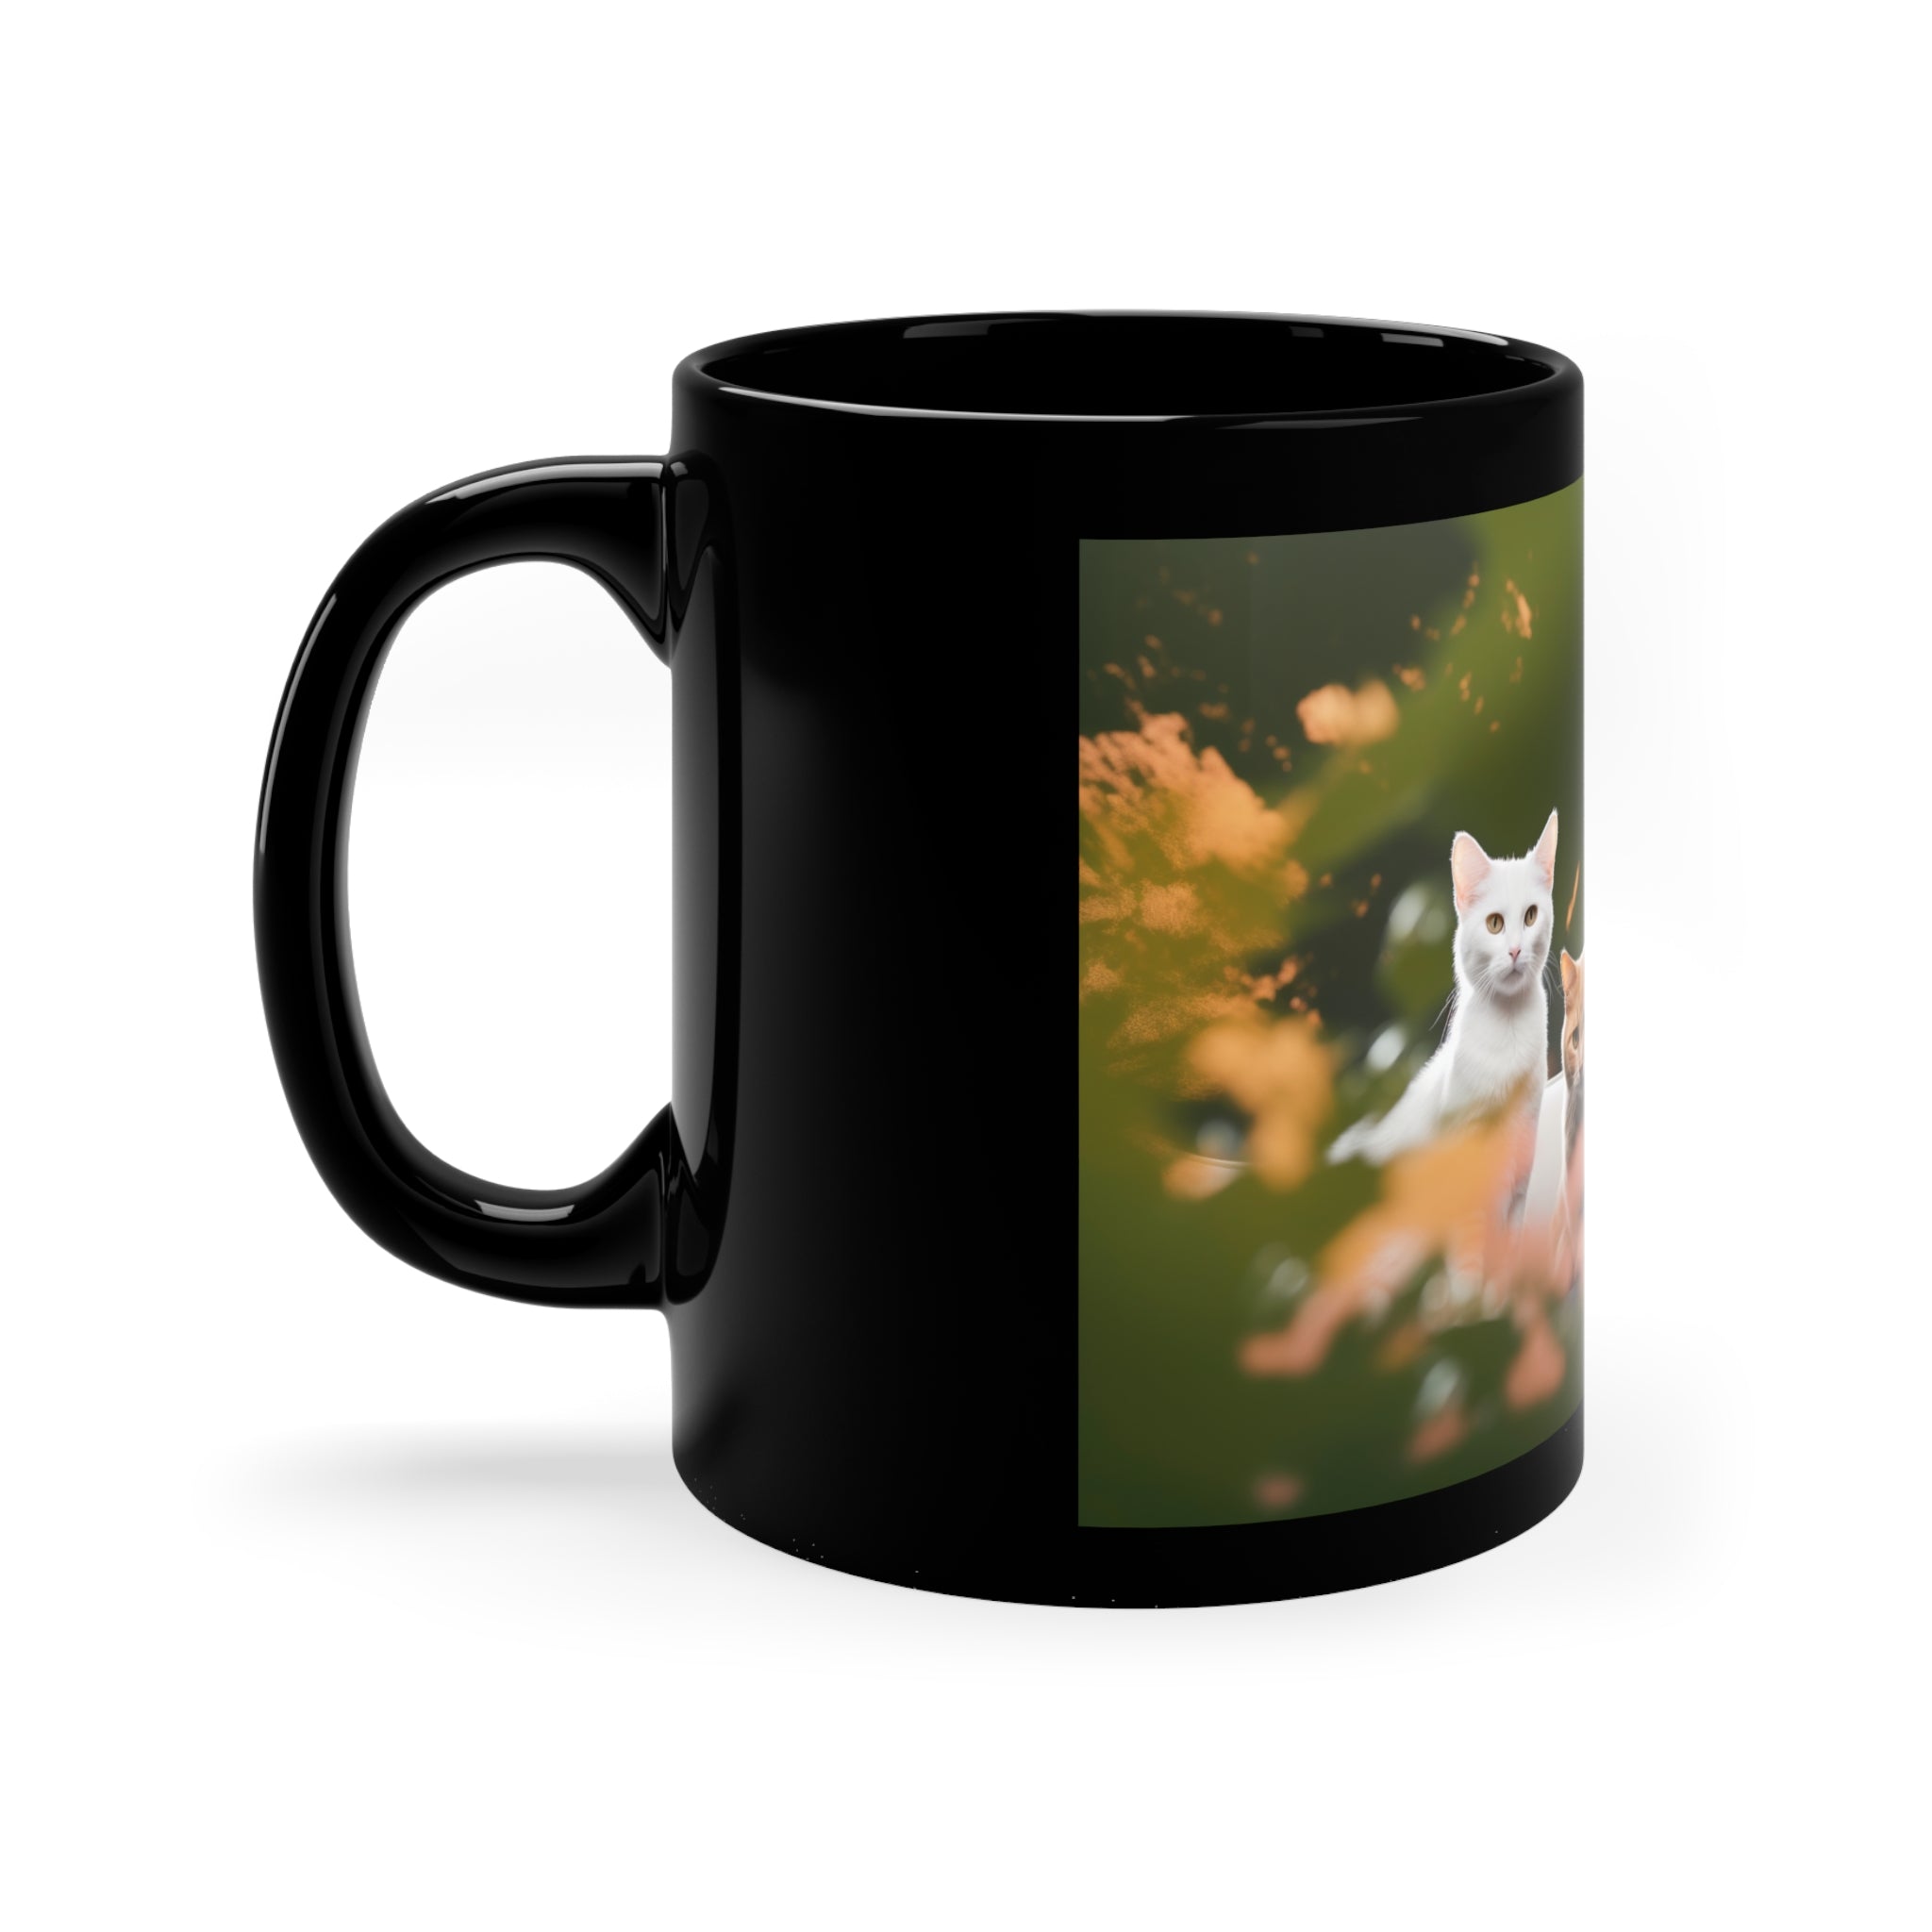 Photorealistic 11oz Black Mug Whimsical Pet Paradise  - Garden Delight with Dogs and Cats - Animal Lover's Drinkware